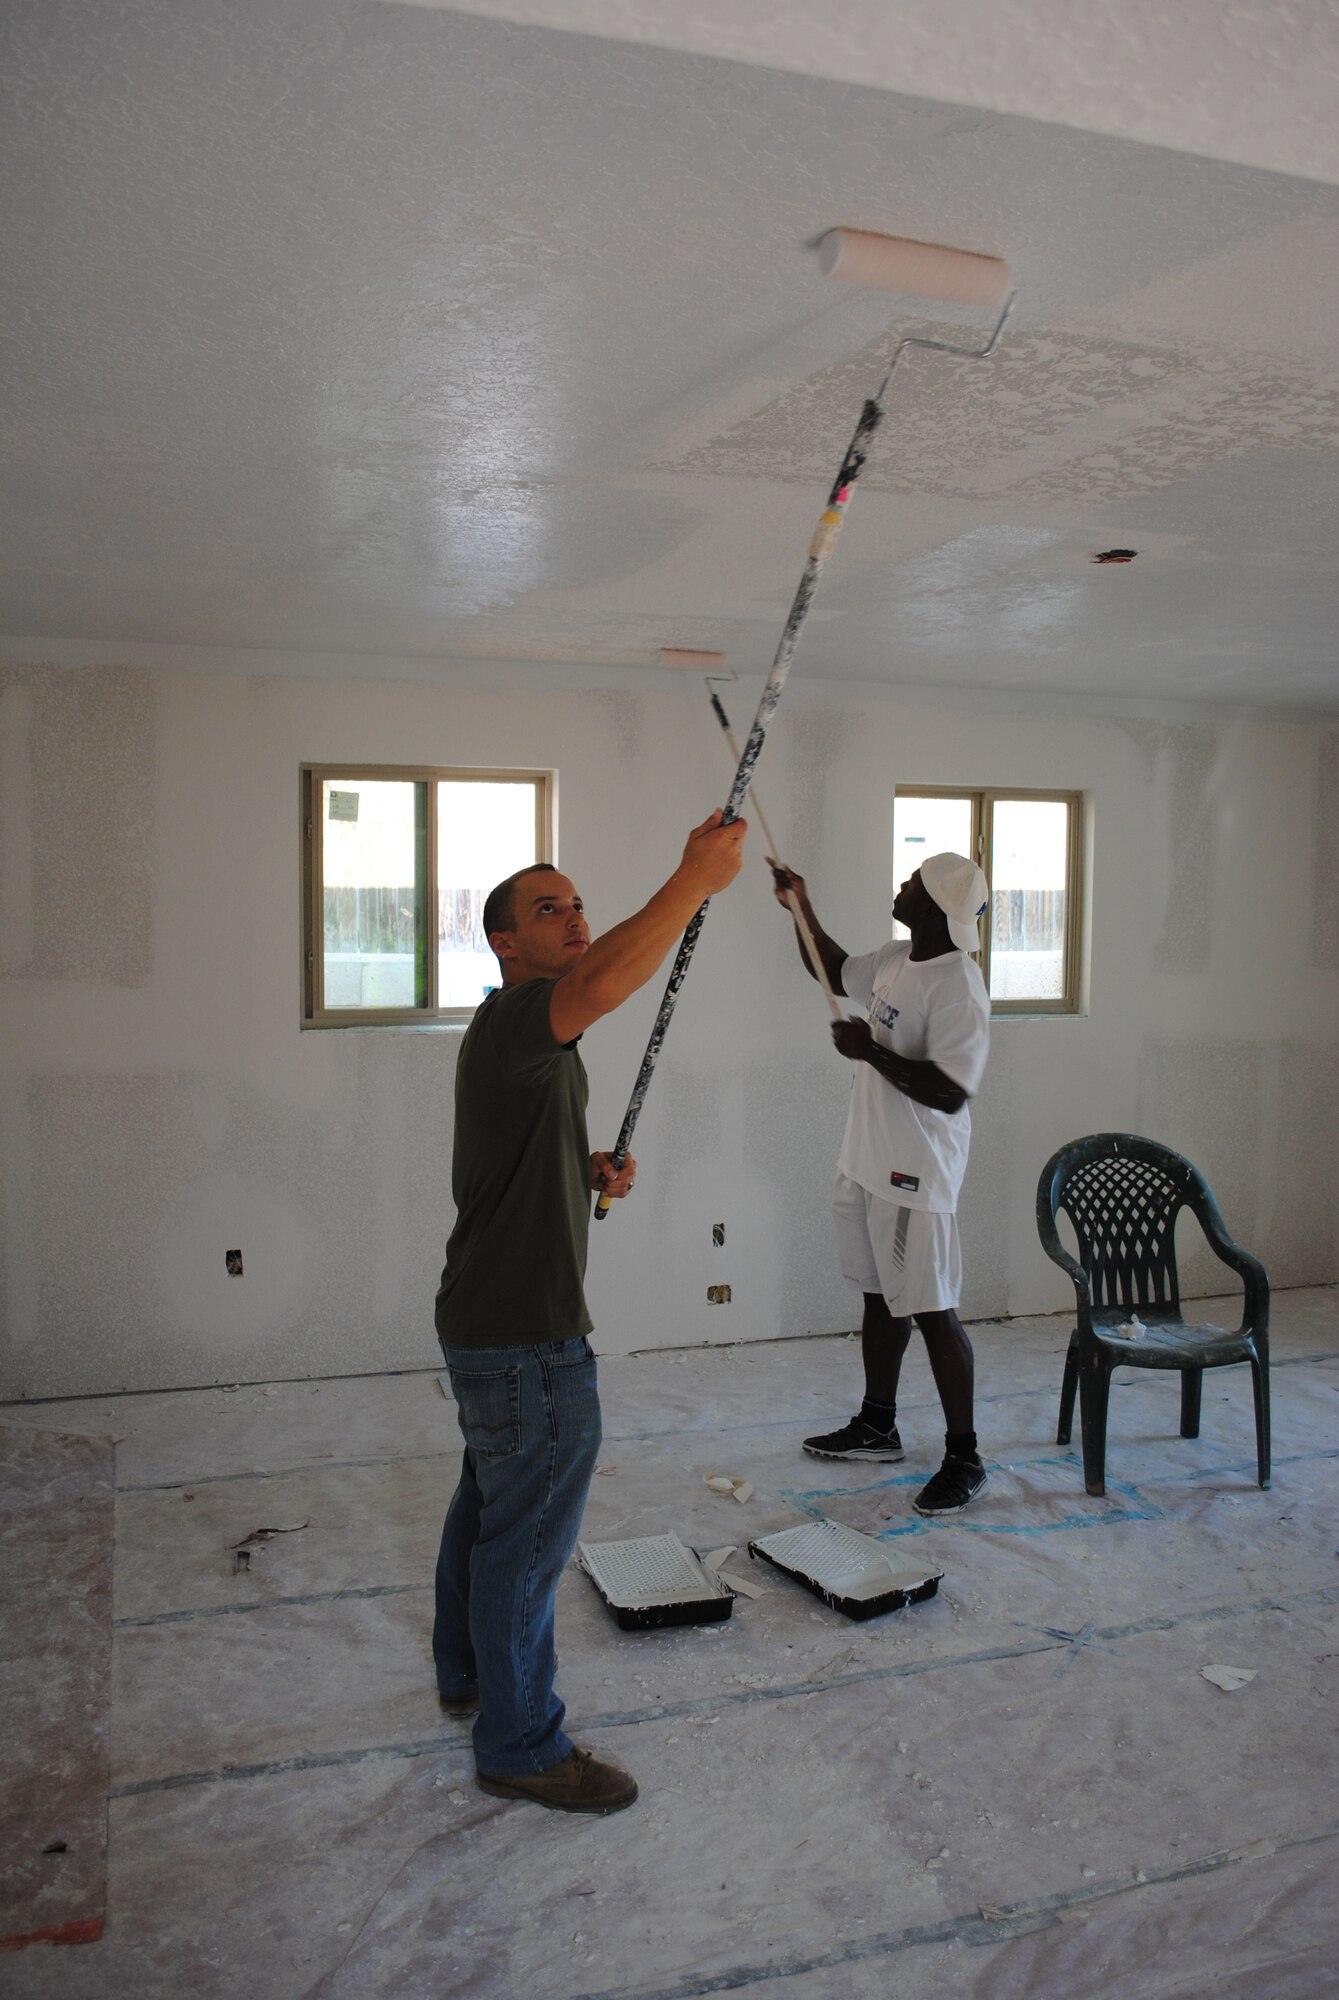 KIRTLAND AFB, N.M. -- Cassie Macdonald and 1st Lt. Joe Castillo, Air Force Nuclear Weapons Center, along with 16 other Airmen, primed and painted a house and garage Saturday for Habitat for Humanity. (Photo by Mike Scott)